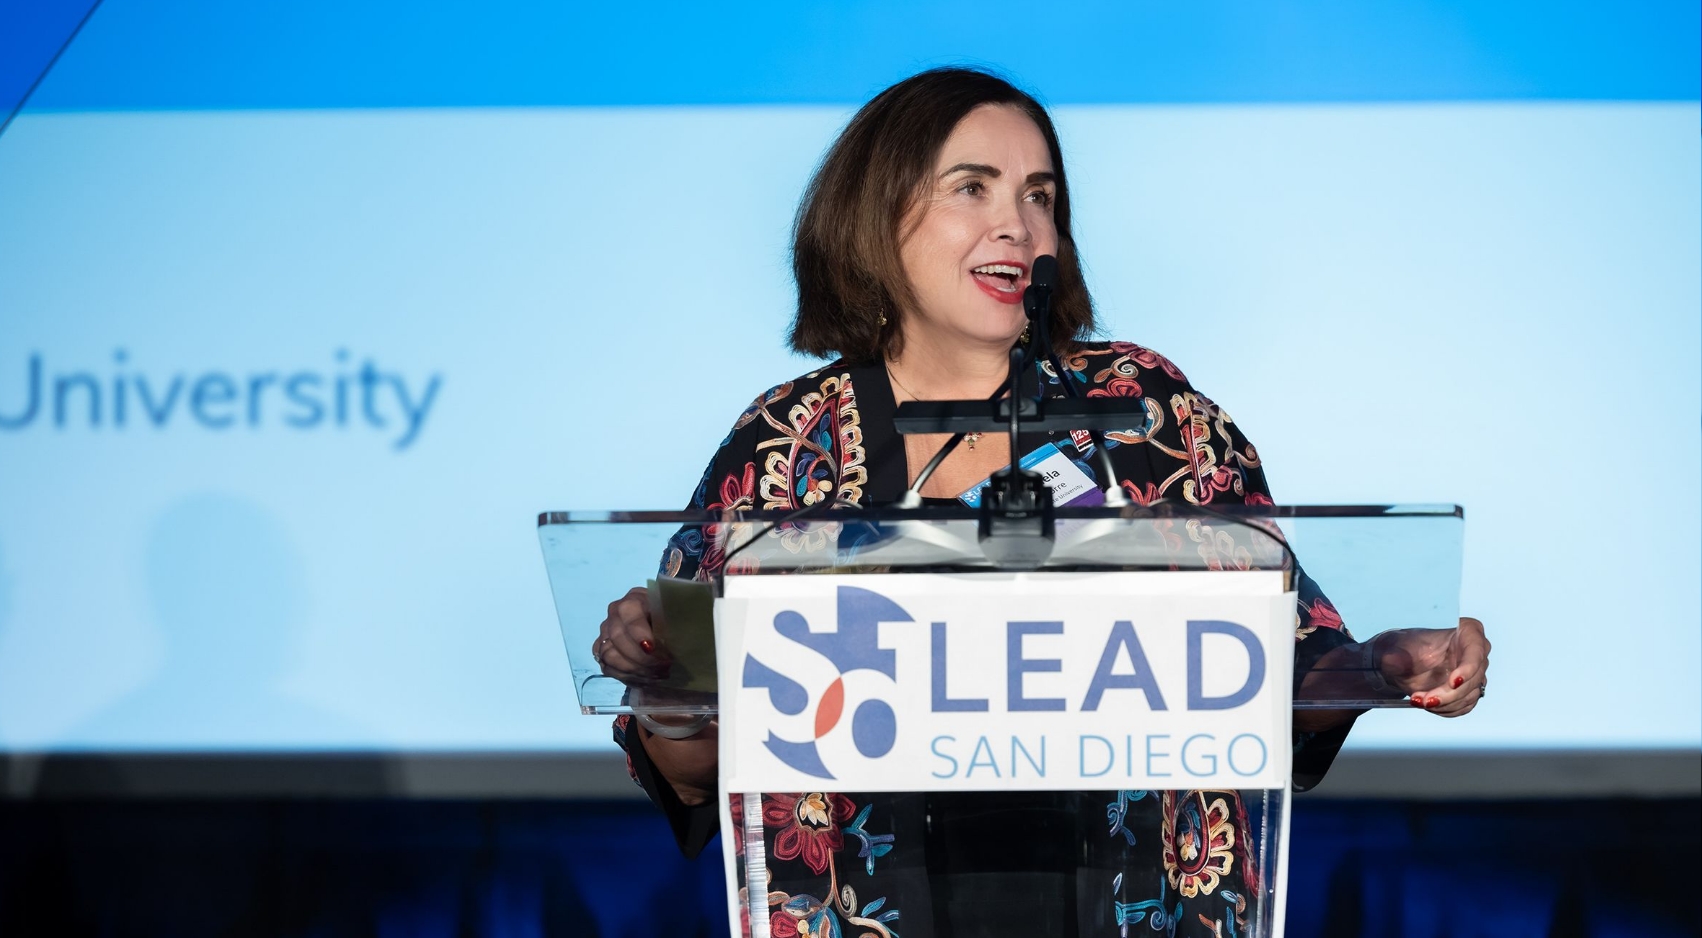 SDSU President Adela de la Torre gives a speech after receiving the 2022 LEAD San Diego Visionary Award for Innovation &amp; Economic Opportunity on Wednesday, Sept. 14, 2022. (Courtesy LEAD San Diego)